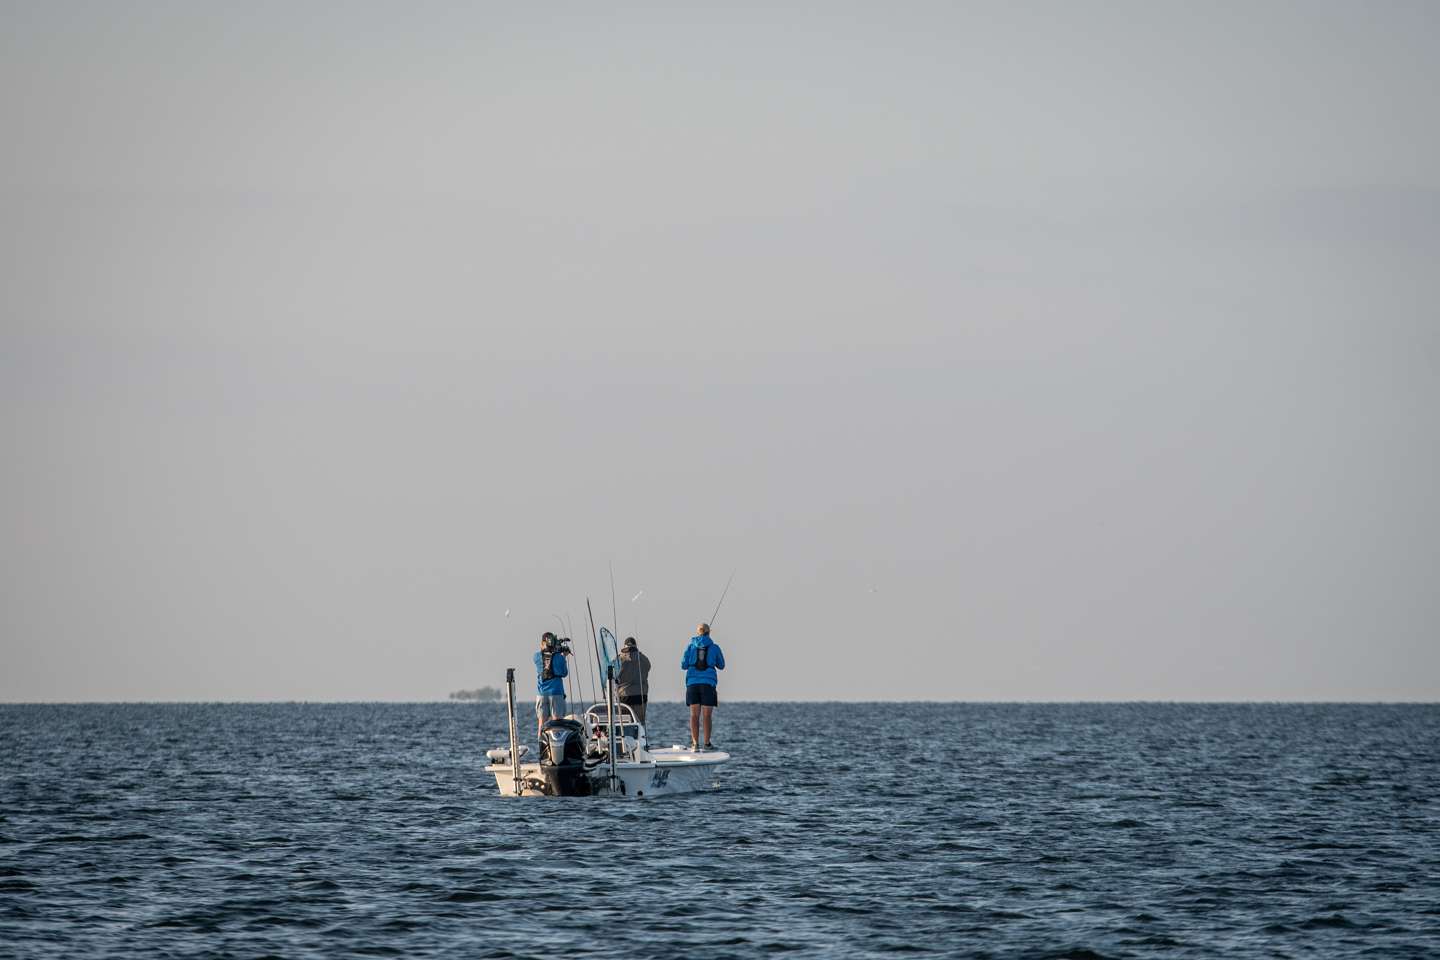 See Patrick Walters and Dwayne Eschete land a limit early during the first day of competition at Port Aransas in Texas.